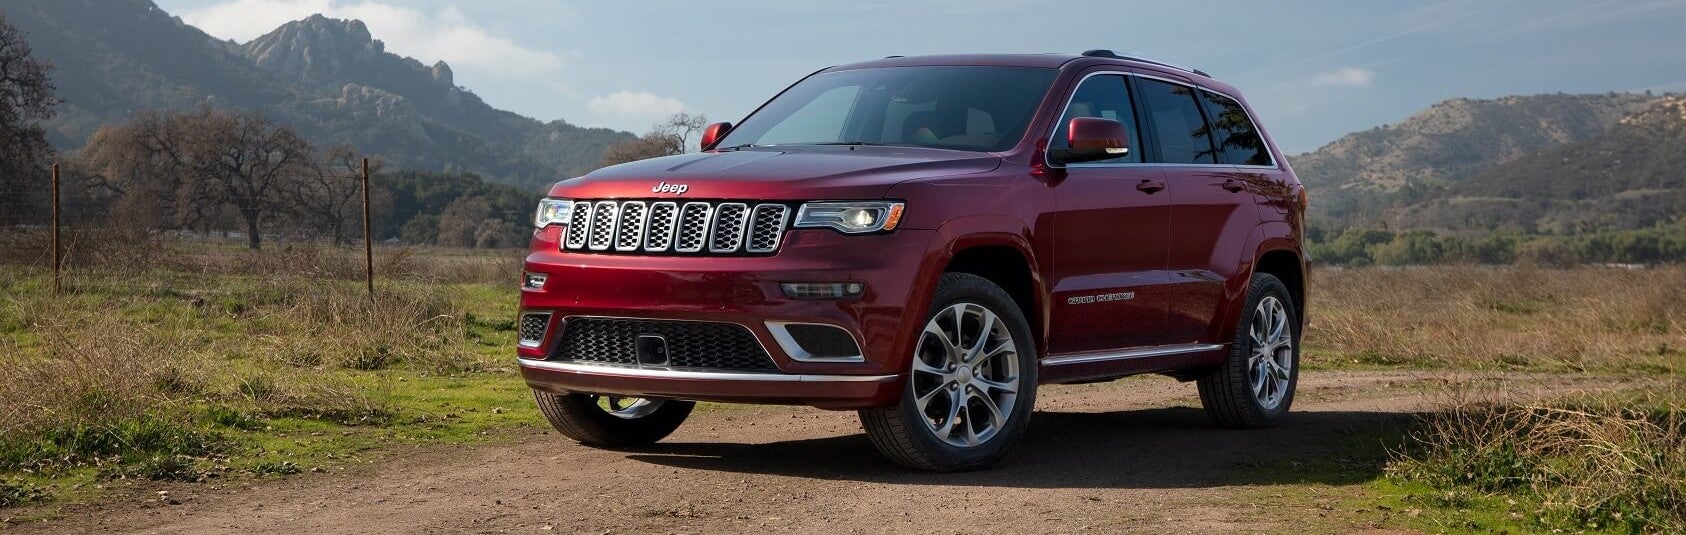 Jeep Grand Cherokee Interior Features, Specs, Dimensions, and Pictures  Available